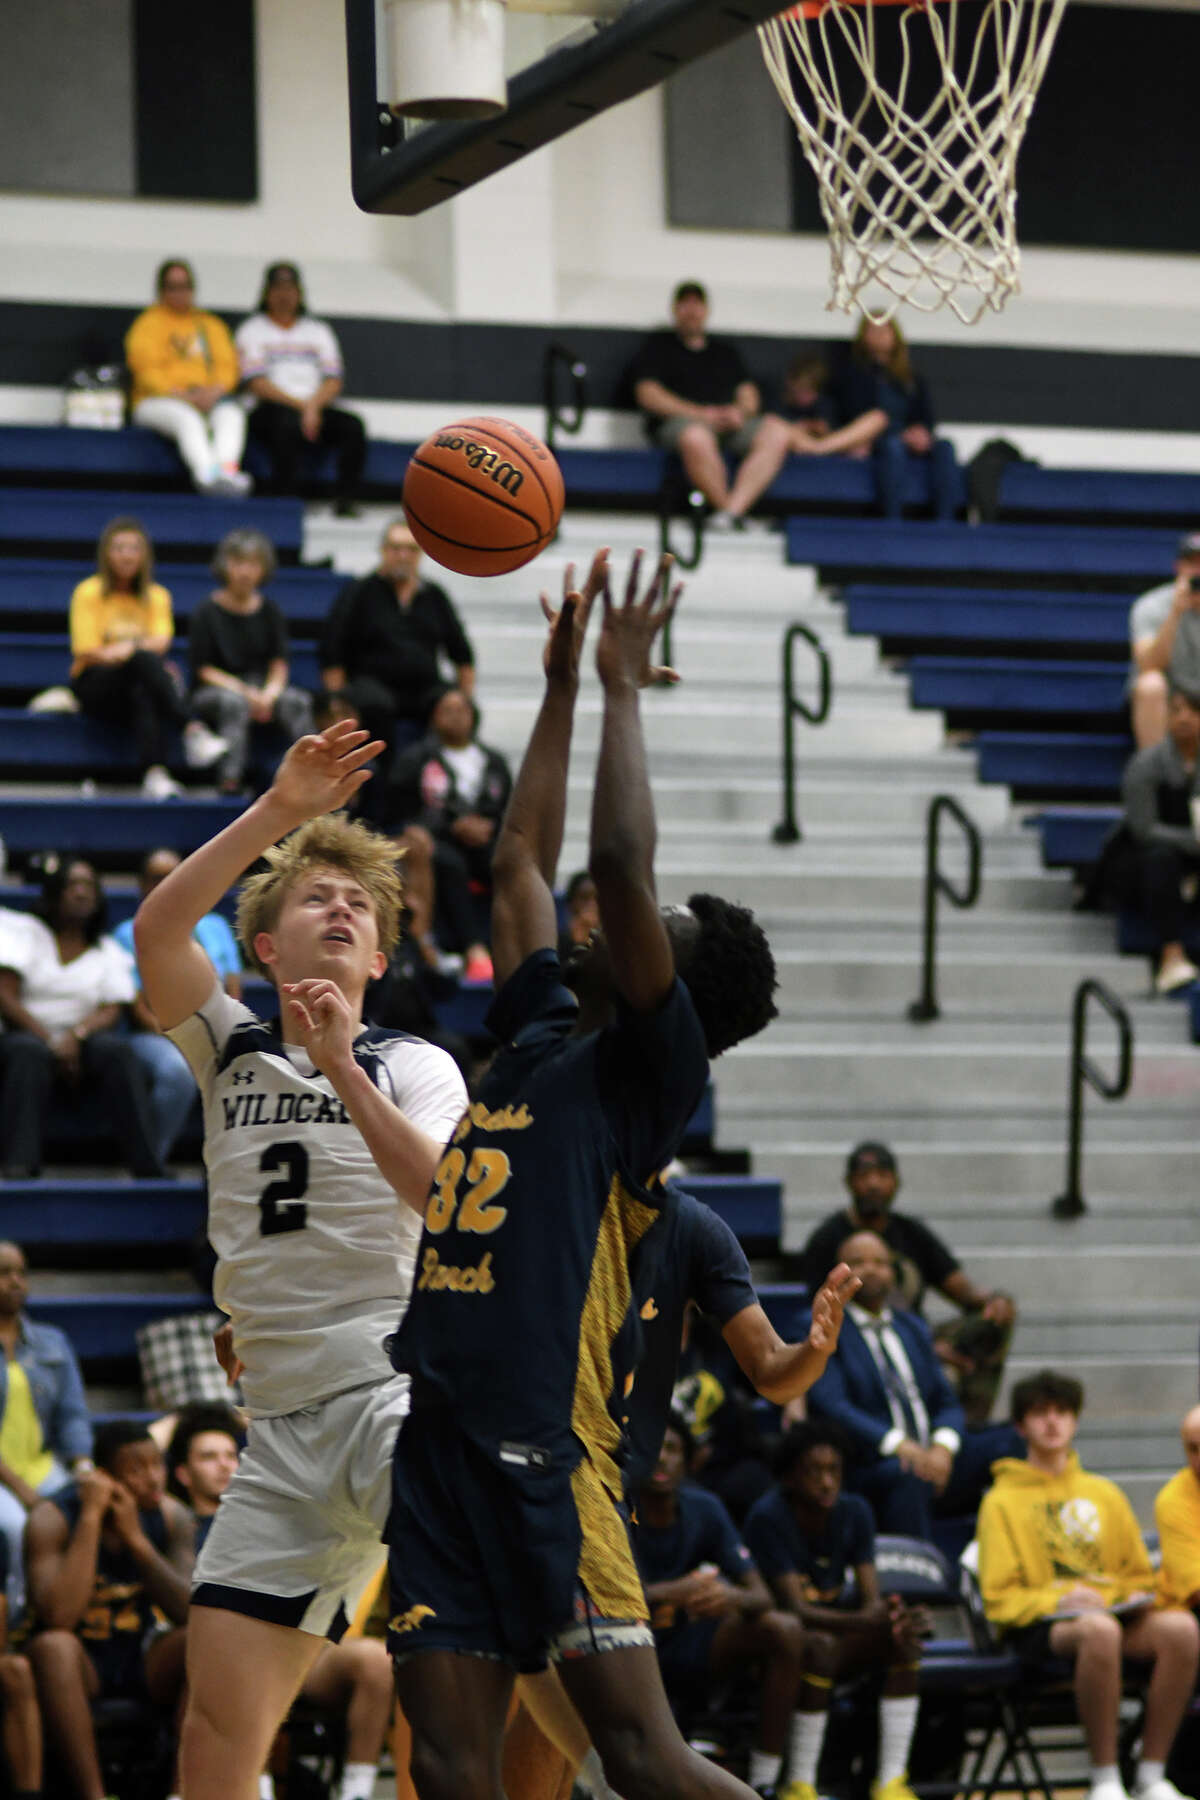 Tomball Memorial junior small forward Luke Reder (2) works for a shot against Cy Ranch senior small forward Mory Sininta (32) during the first quarter of their matchup at TMHS on Dec. 6, 2022.